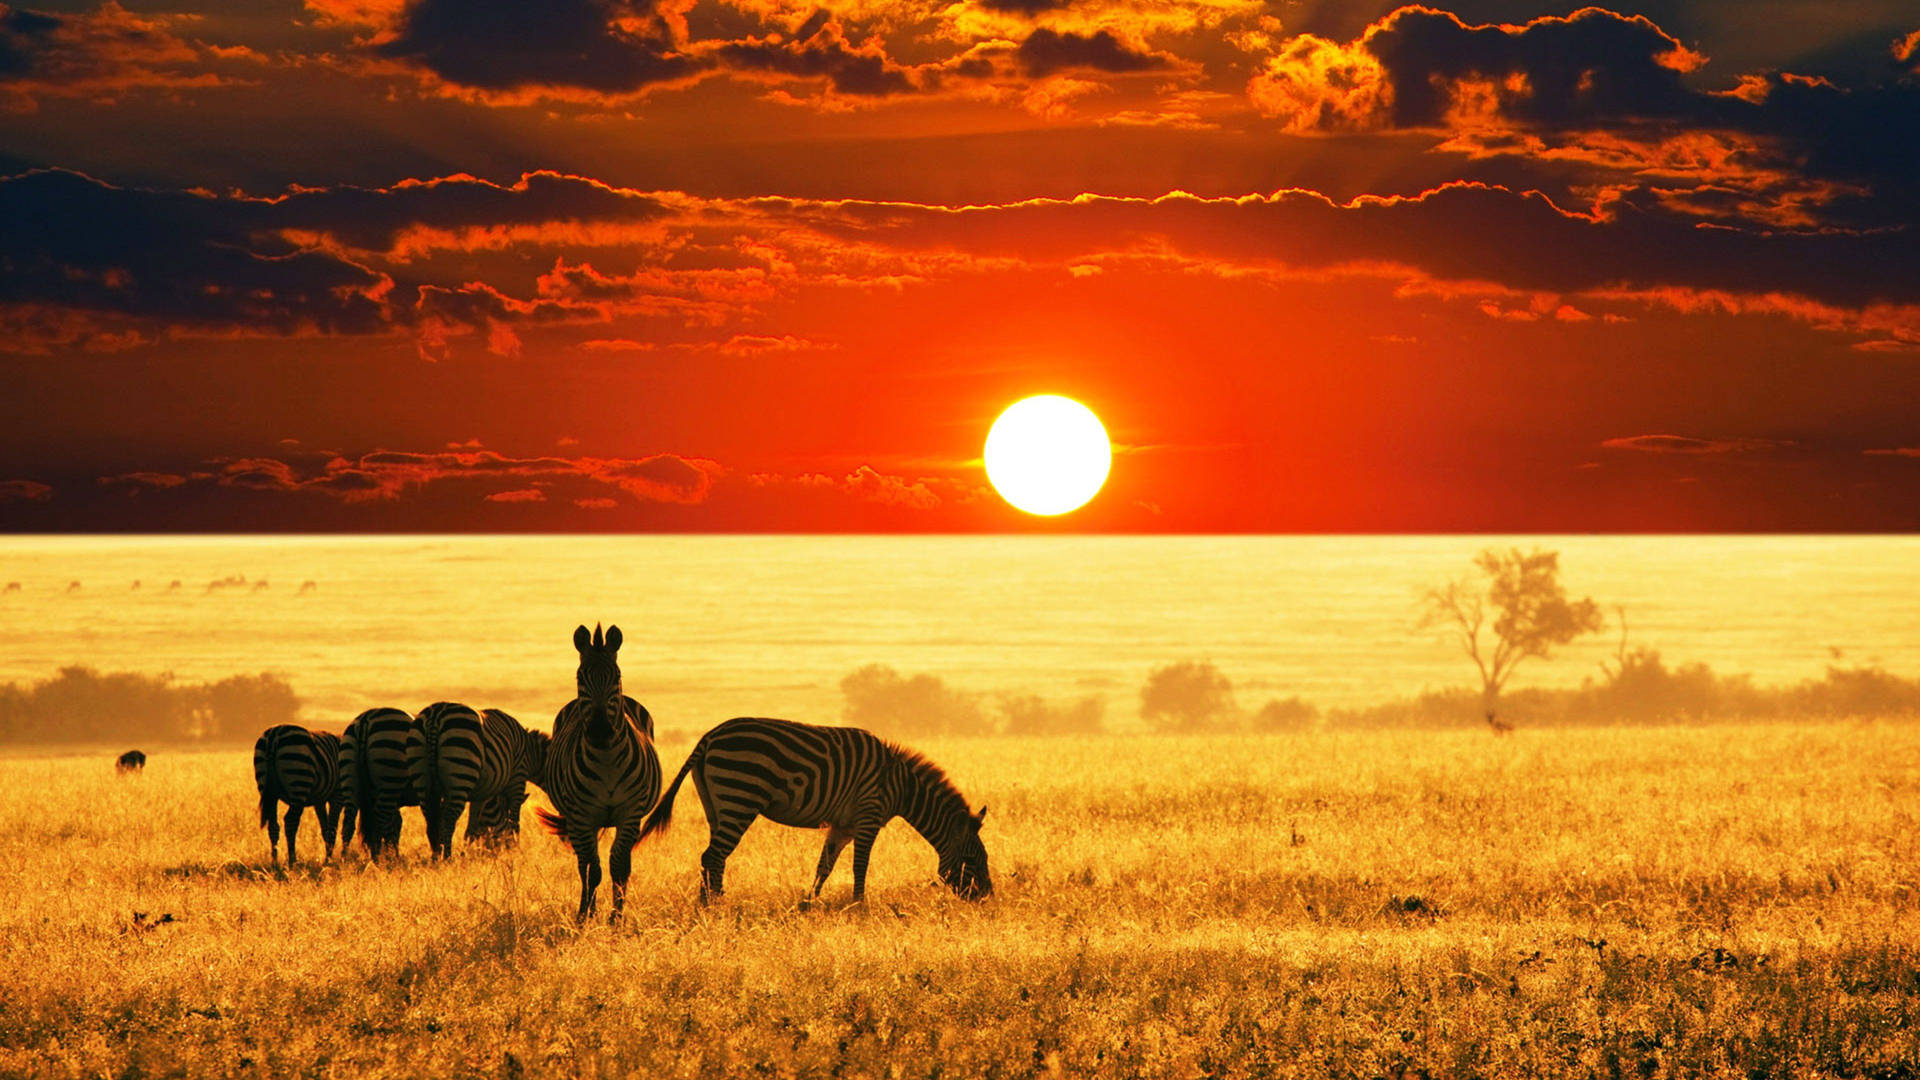 Zebra And Sunset In Africa Background